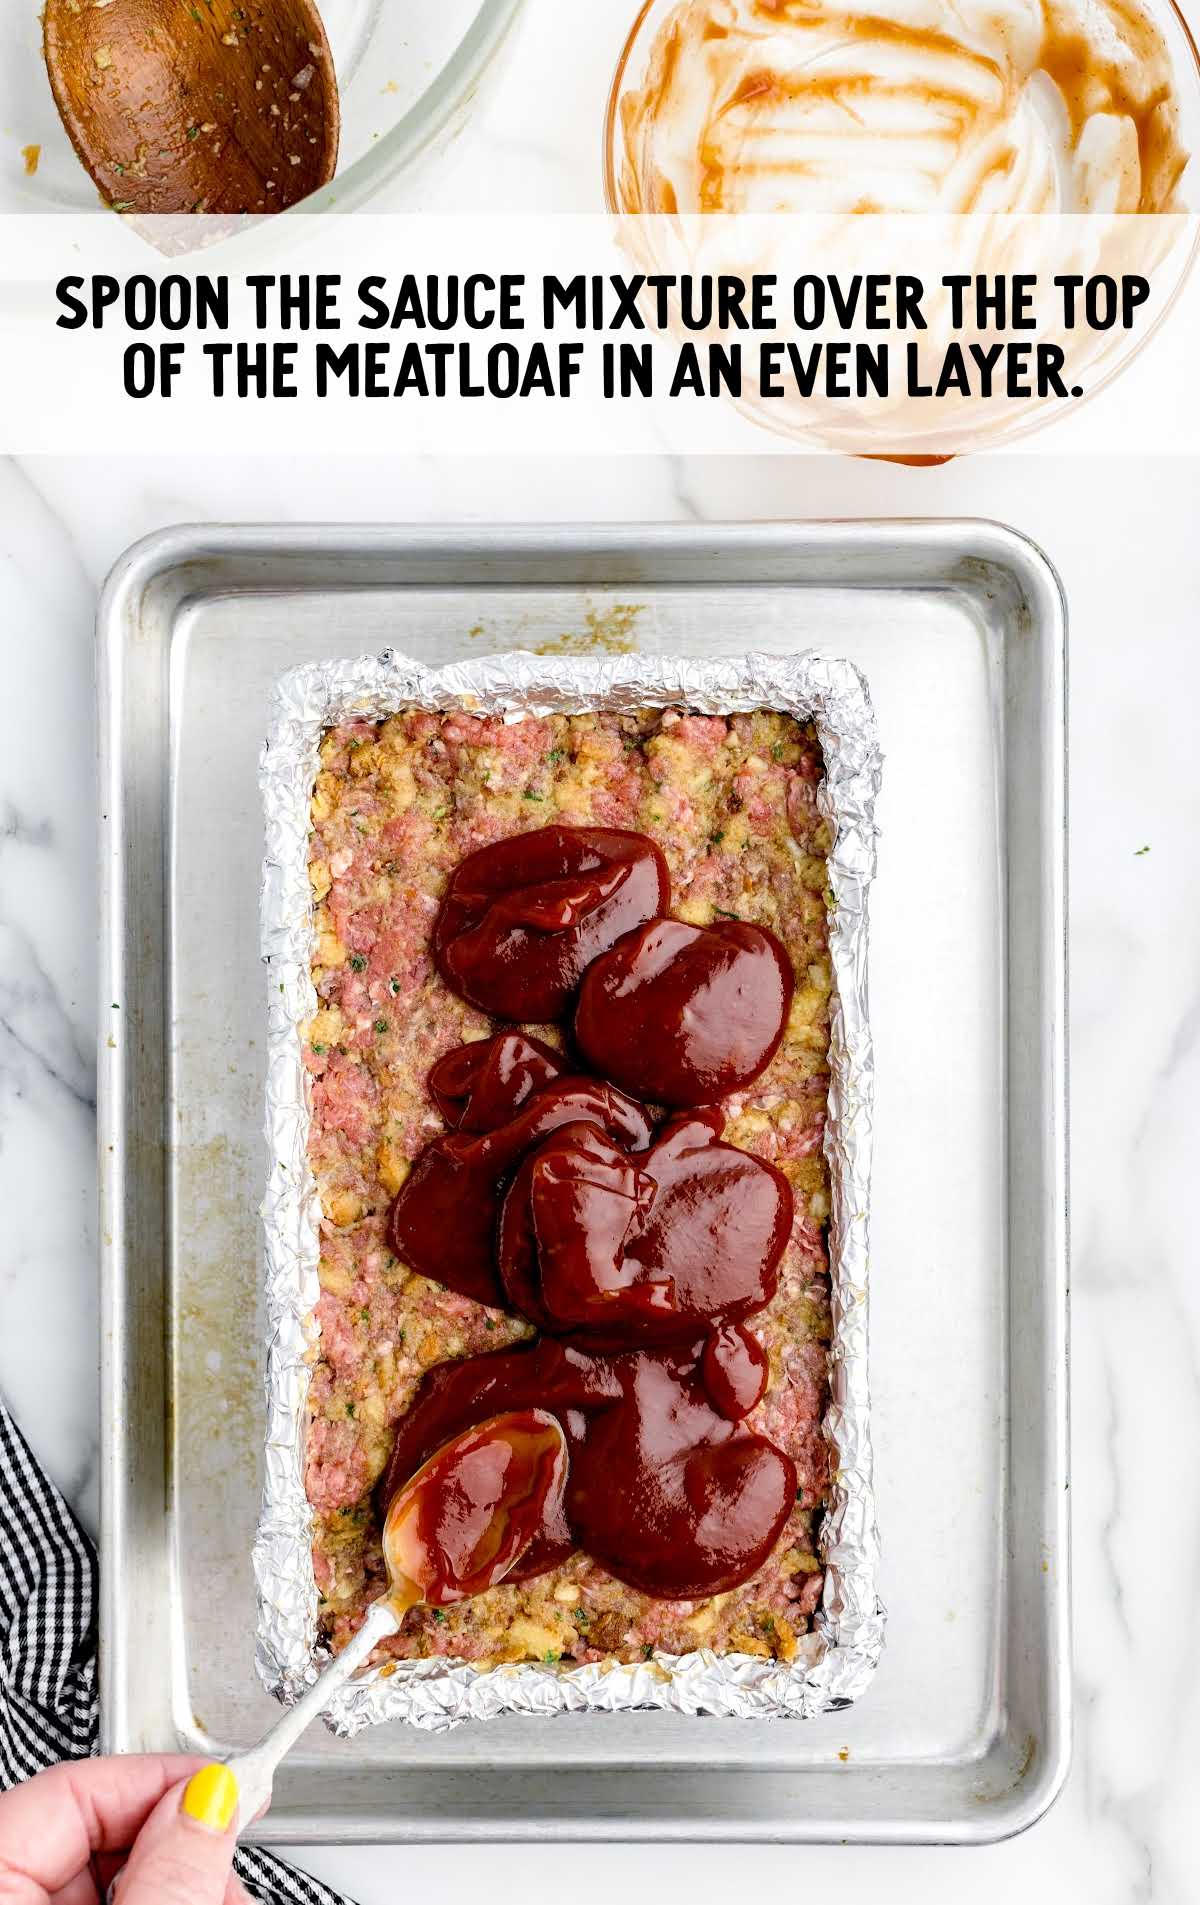 sauce mixture spooned over the top of the meatloaf